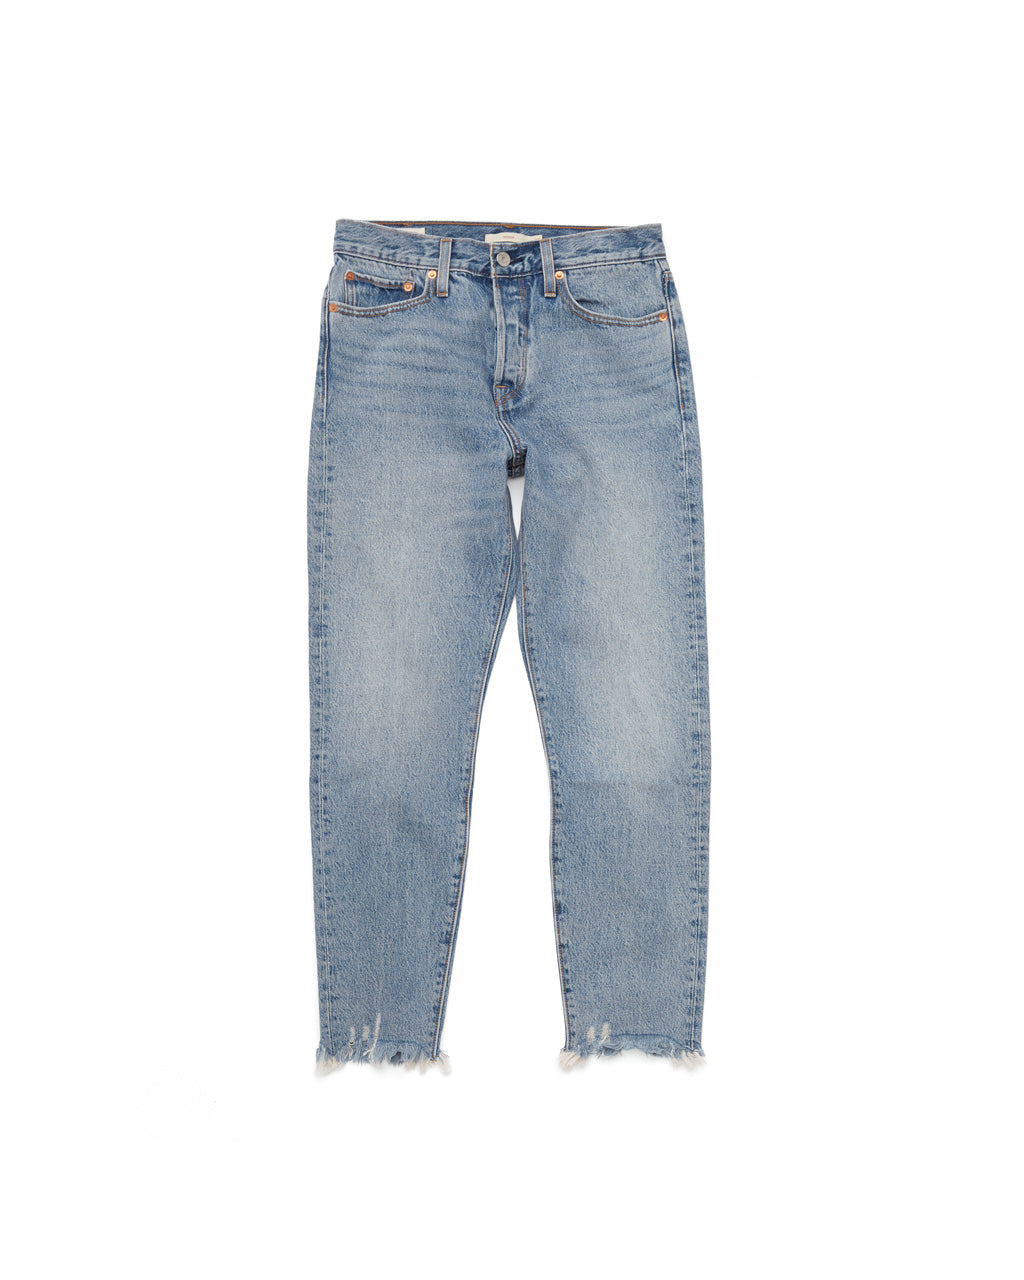 Wedgie Icon Fit Jeans - Shut Up by levi's - jeans - ban.do